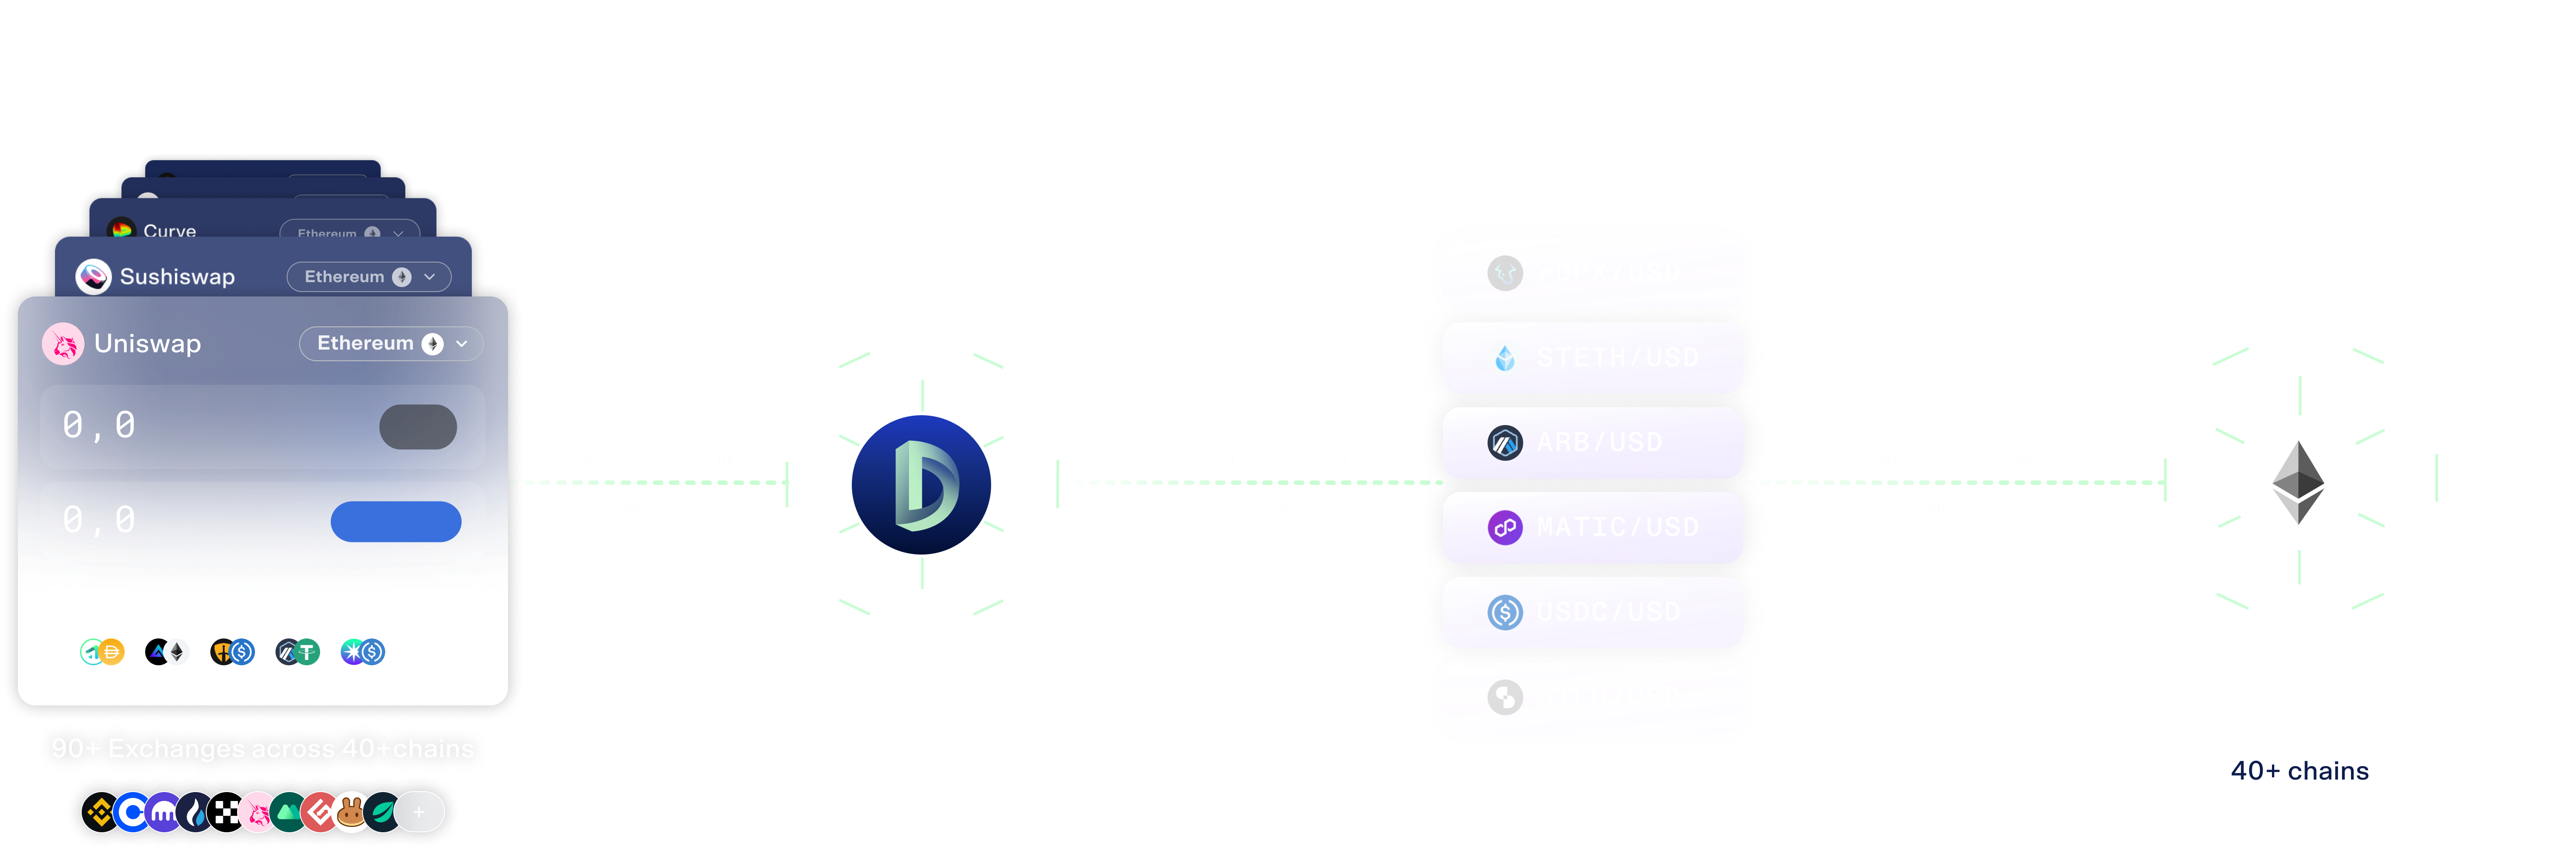 DIA's data journey on Ethereum. From left to right: data sourcing from DEX and CEXs, computation in Oracle Platform (DIA), Price feed creation , and delivery on Ethereum via oracles